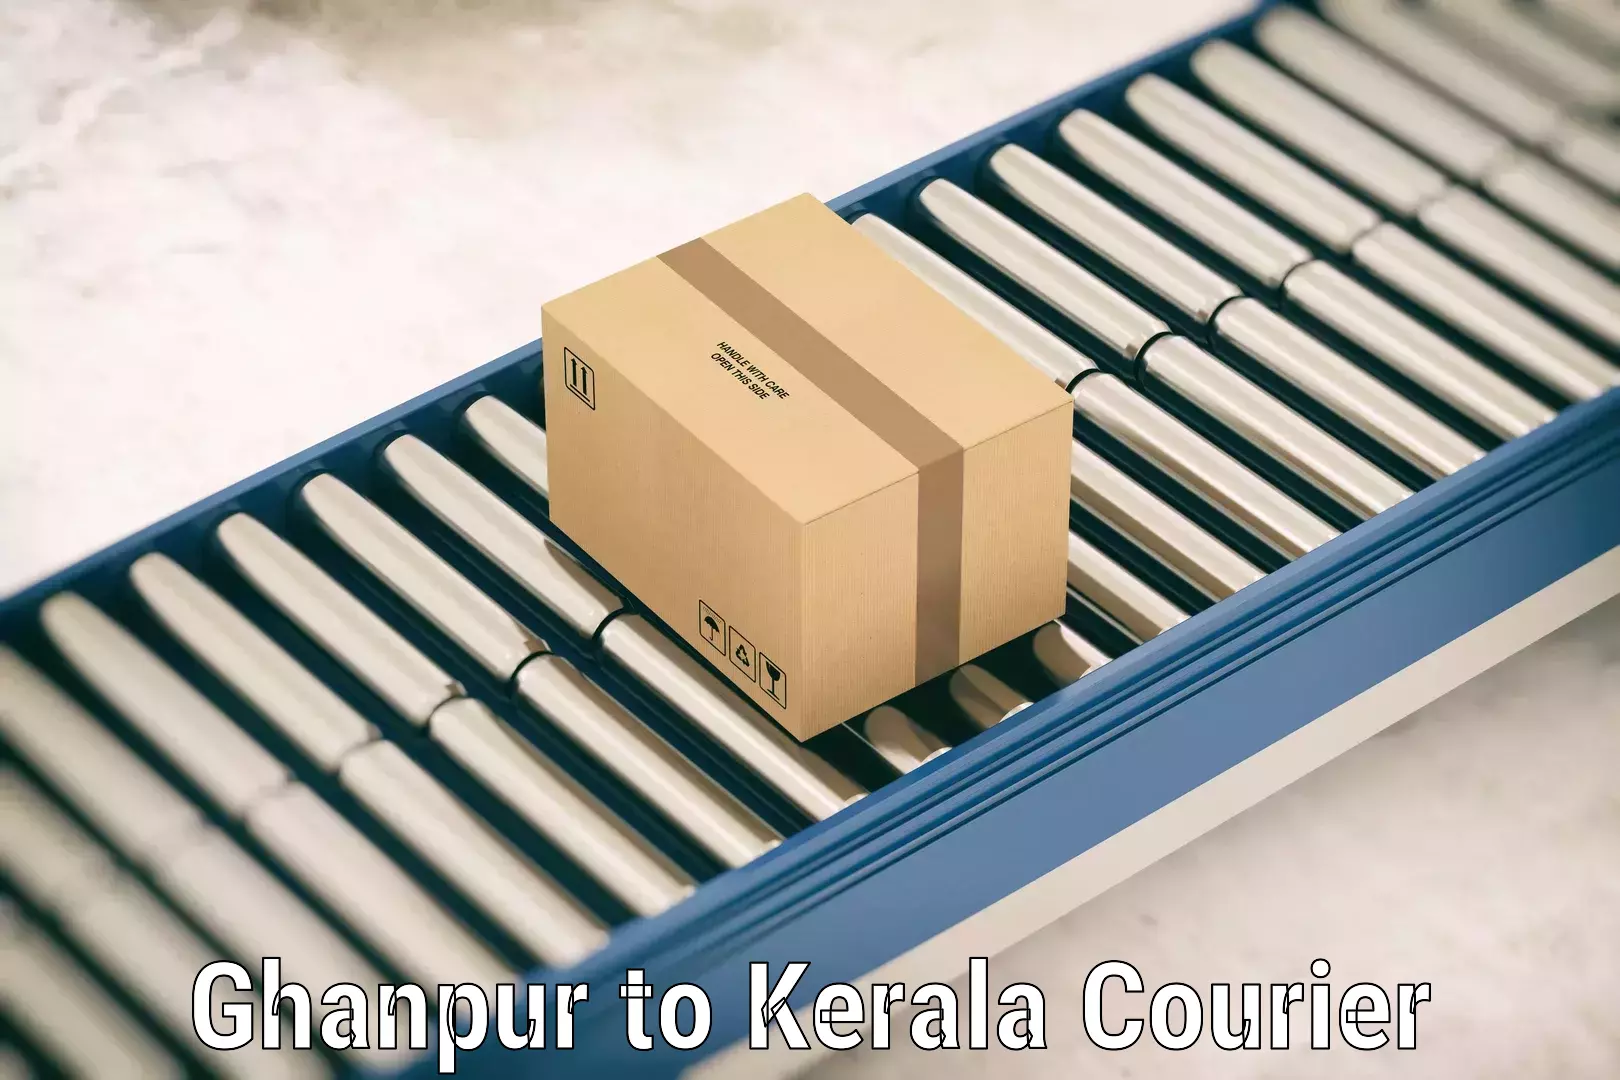 Baggage delivery technology Ghanpur to Chungatra